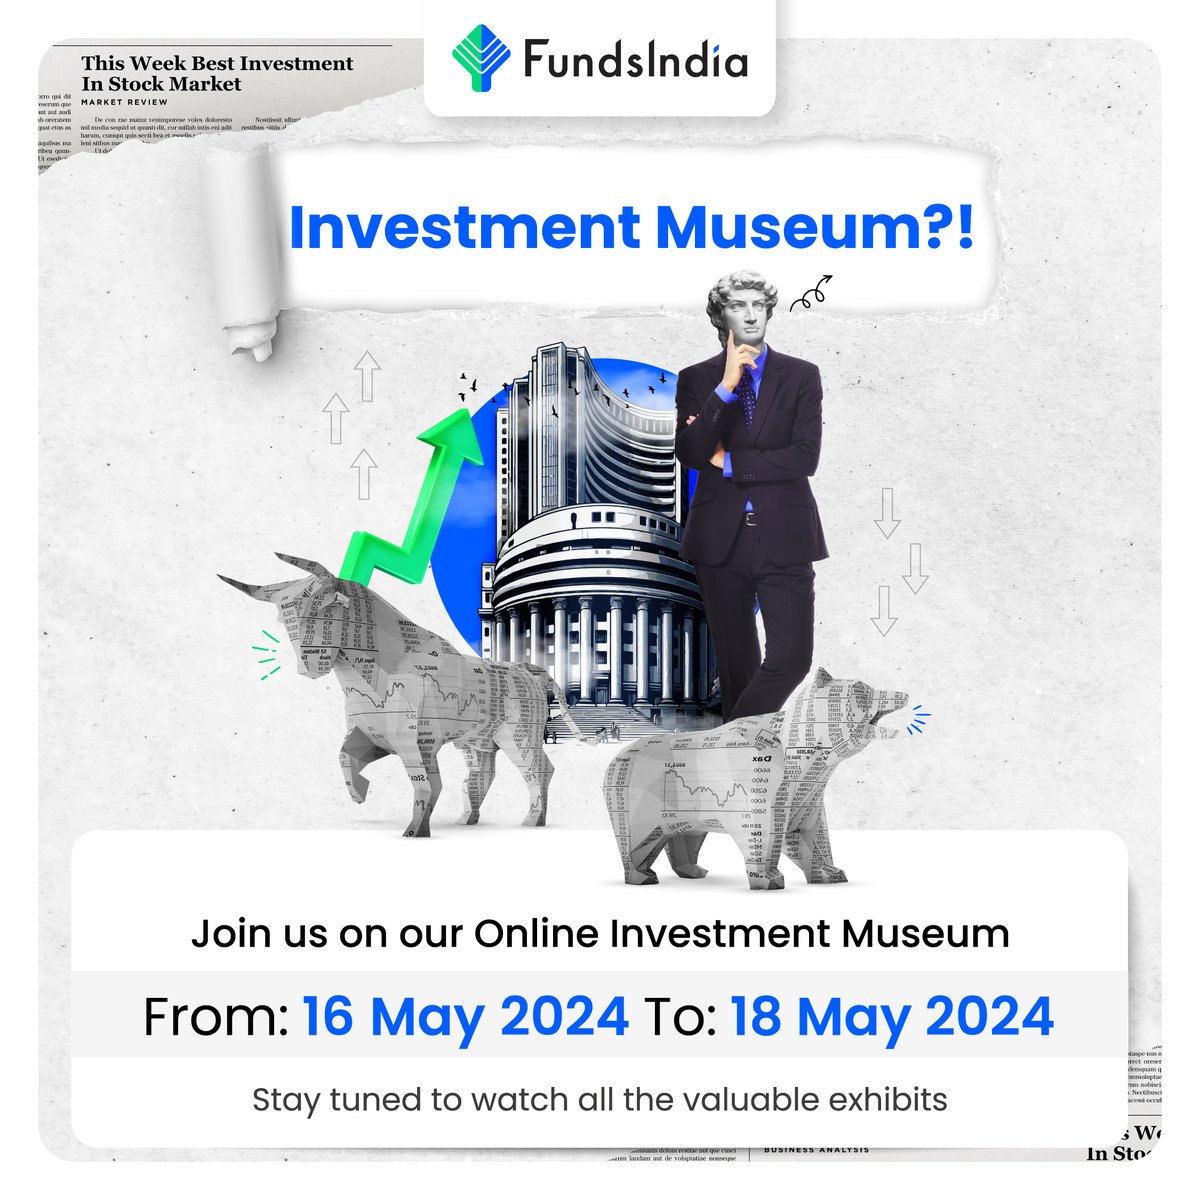 Immerse yourself in a world of wealth creation📈as we showcase valuable exhibits, insightful discussions, and groundbreaking investment strategies—all from the comfort of your own home. Stay tuned🔜

#investmentmuseum #staytuned #wealthcreation #investmentstrategies #insights